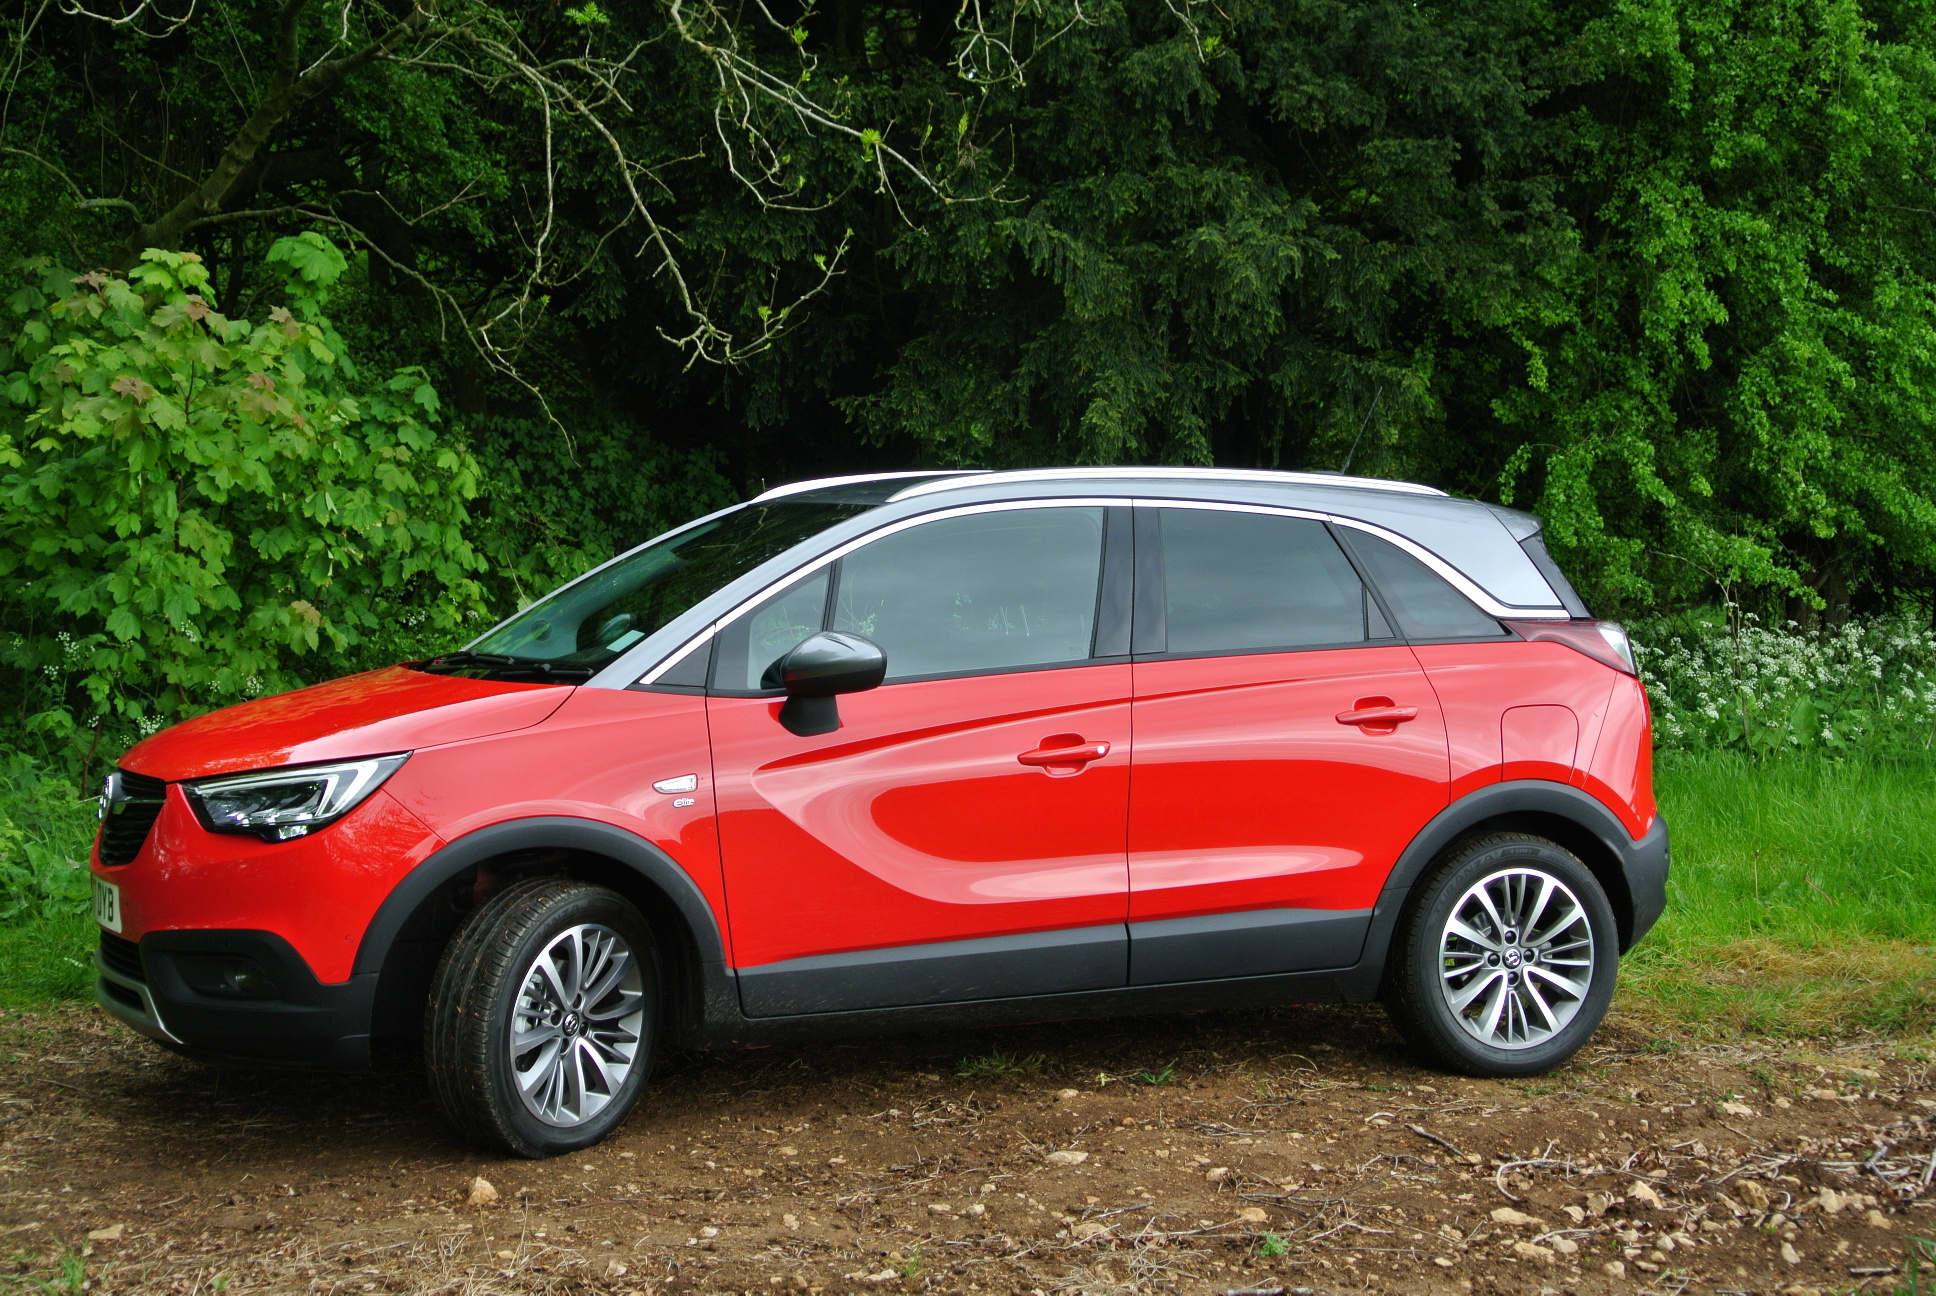 Vauxhall Crossland X delivers SUV-lite with MPV-heavy qualities